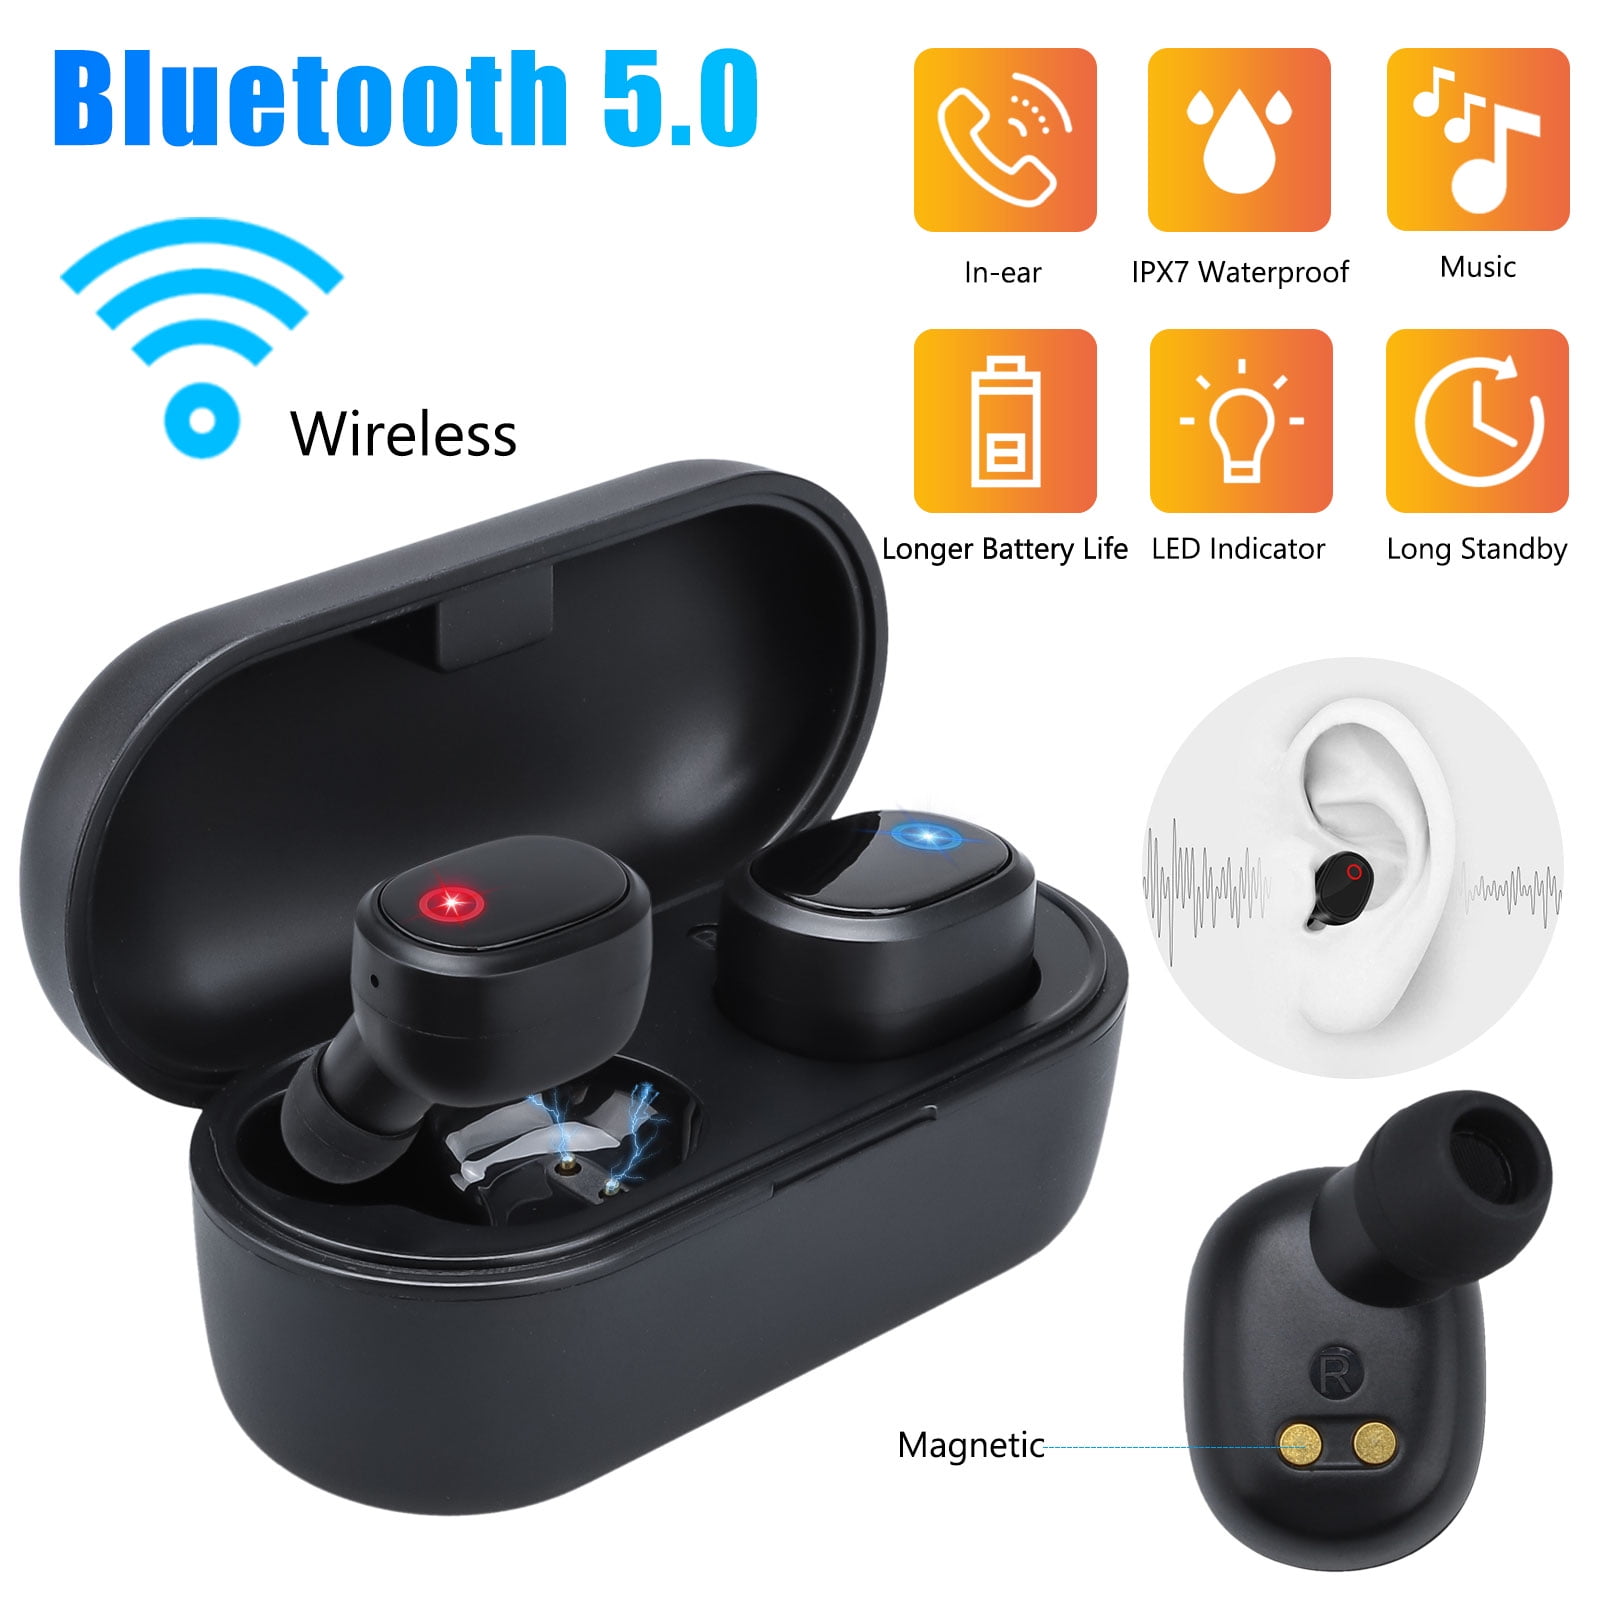 EEEKit Bluetooth 5.0 True Wireless Earbuds In-Ear Sports Noise Cancelling Headphones Earphones with Built-in Mic, Charging Case for Smartphones PC Tablets